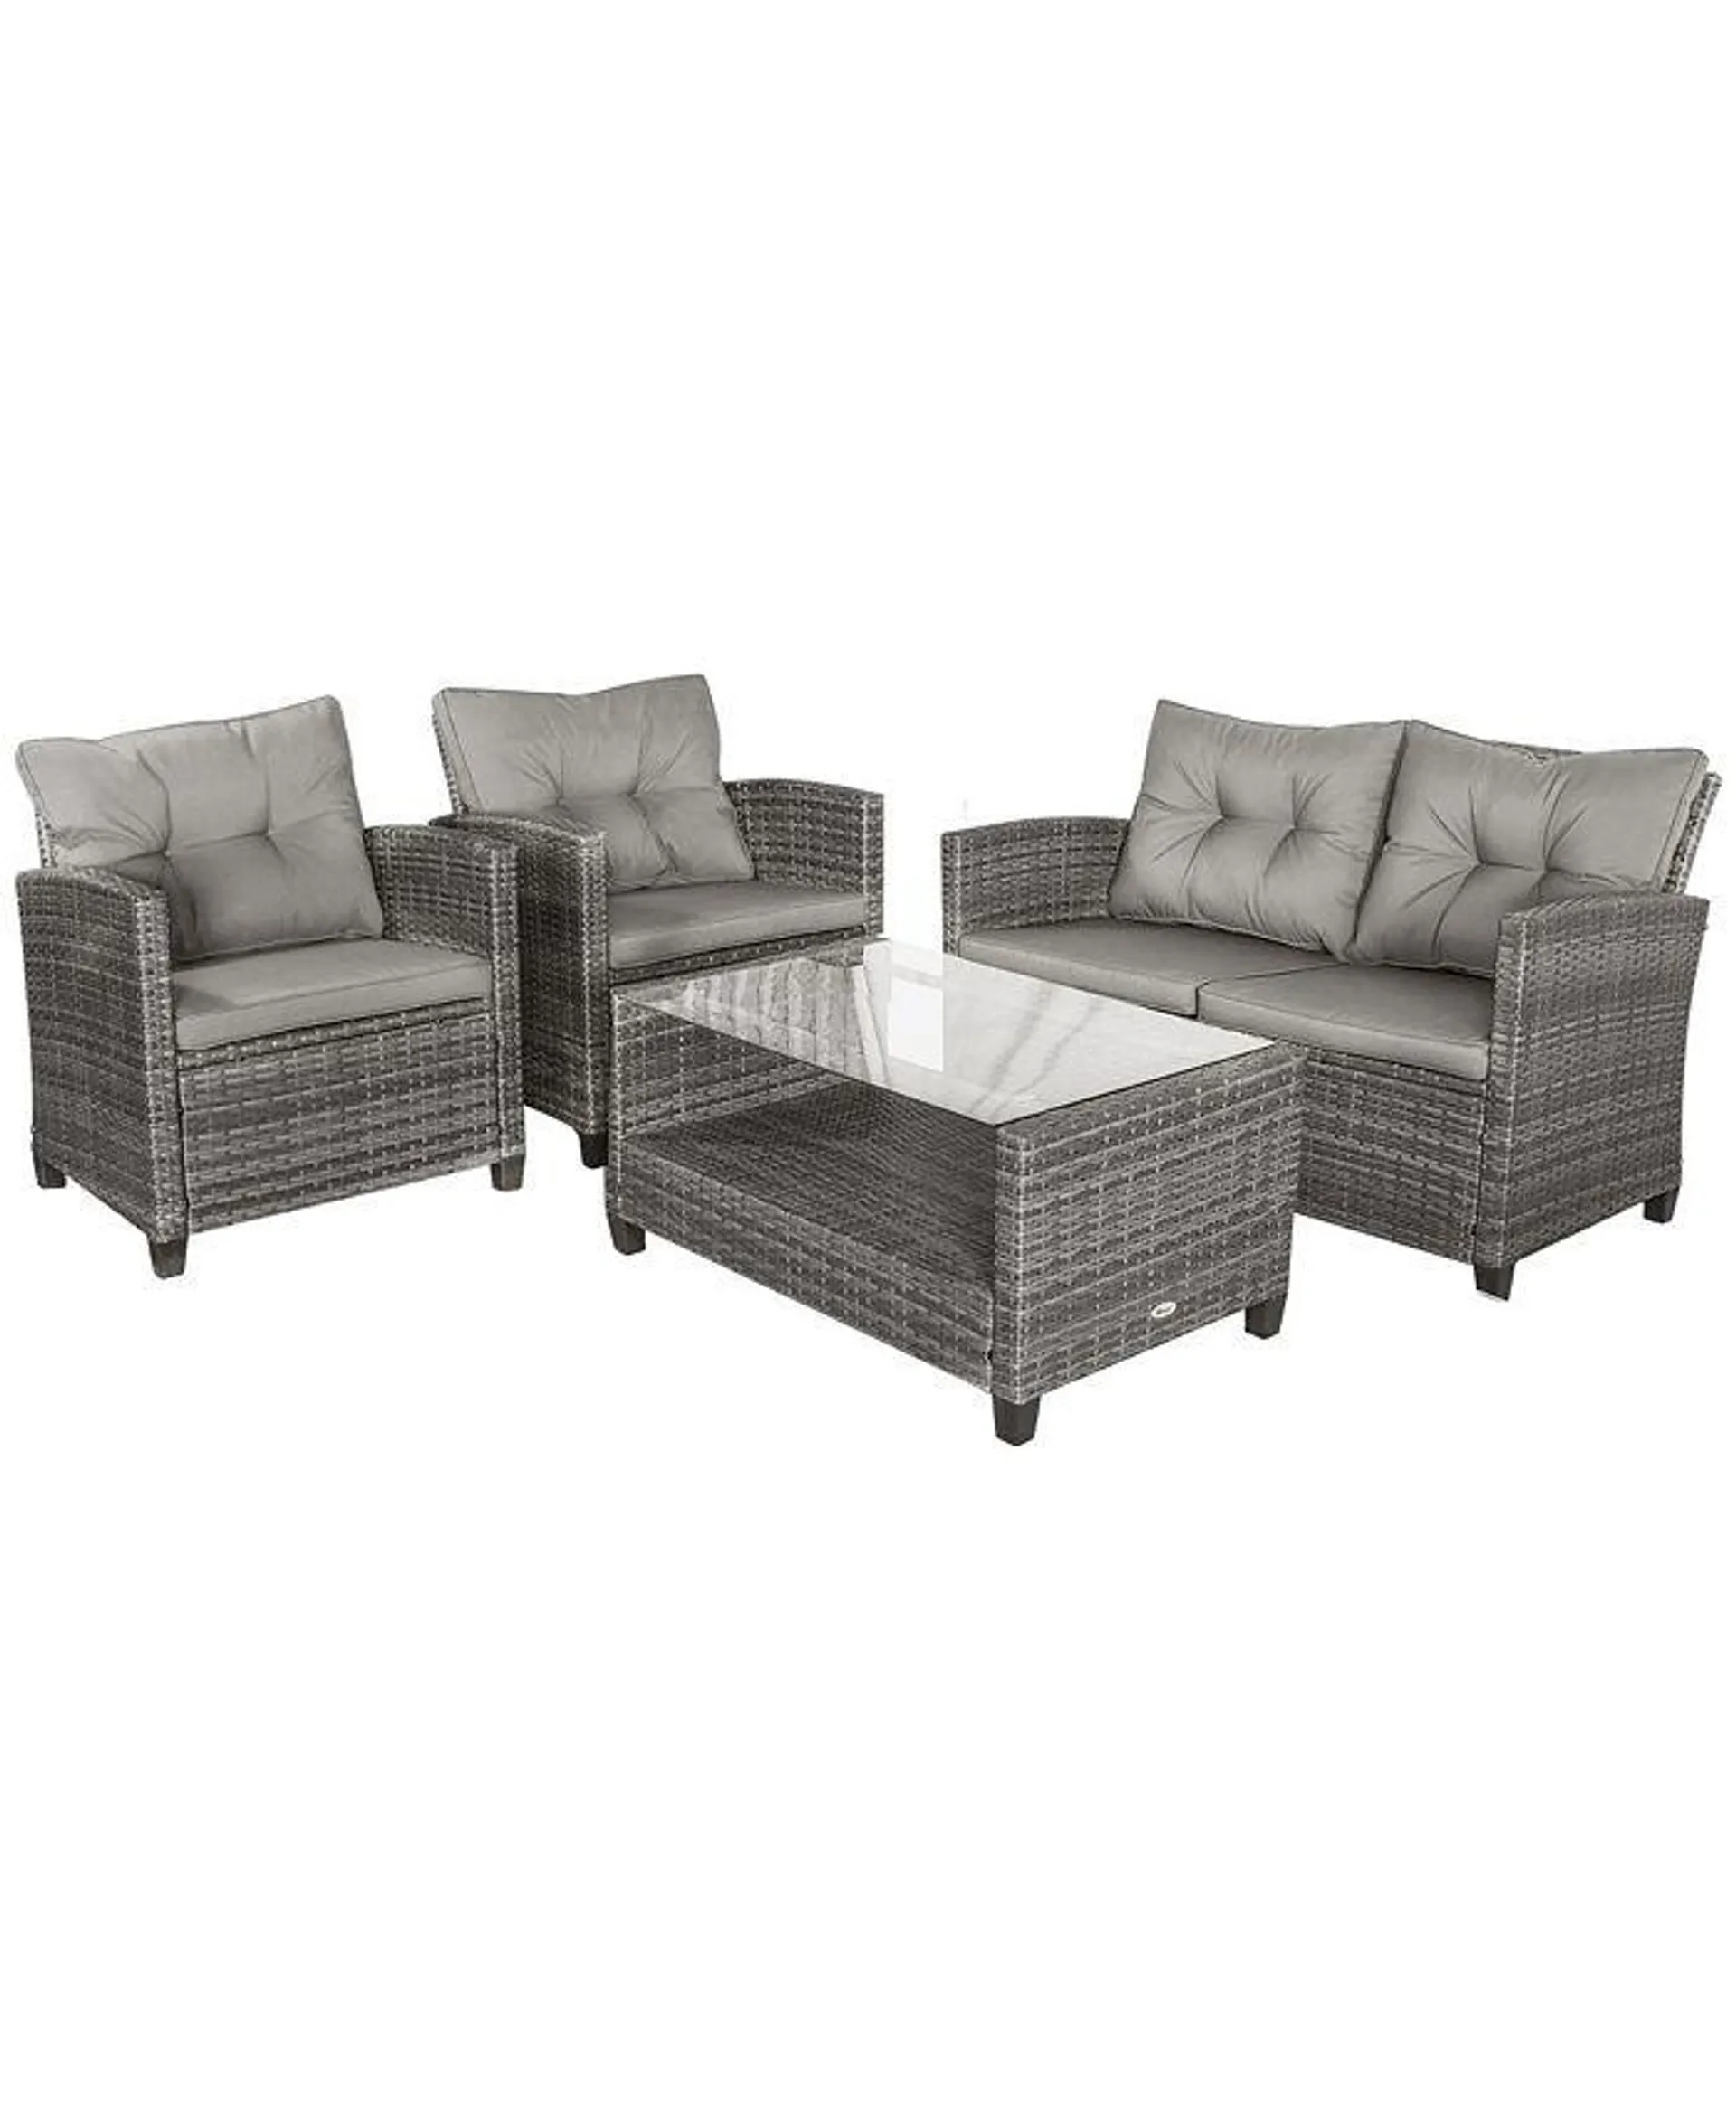 4 Pieces Patio Furniture Sets Rattan Wicker Chair w/ Table Outdoor Conversation Set with Cushion for Backyard Porch Garden Poolside and Deck, Onyx